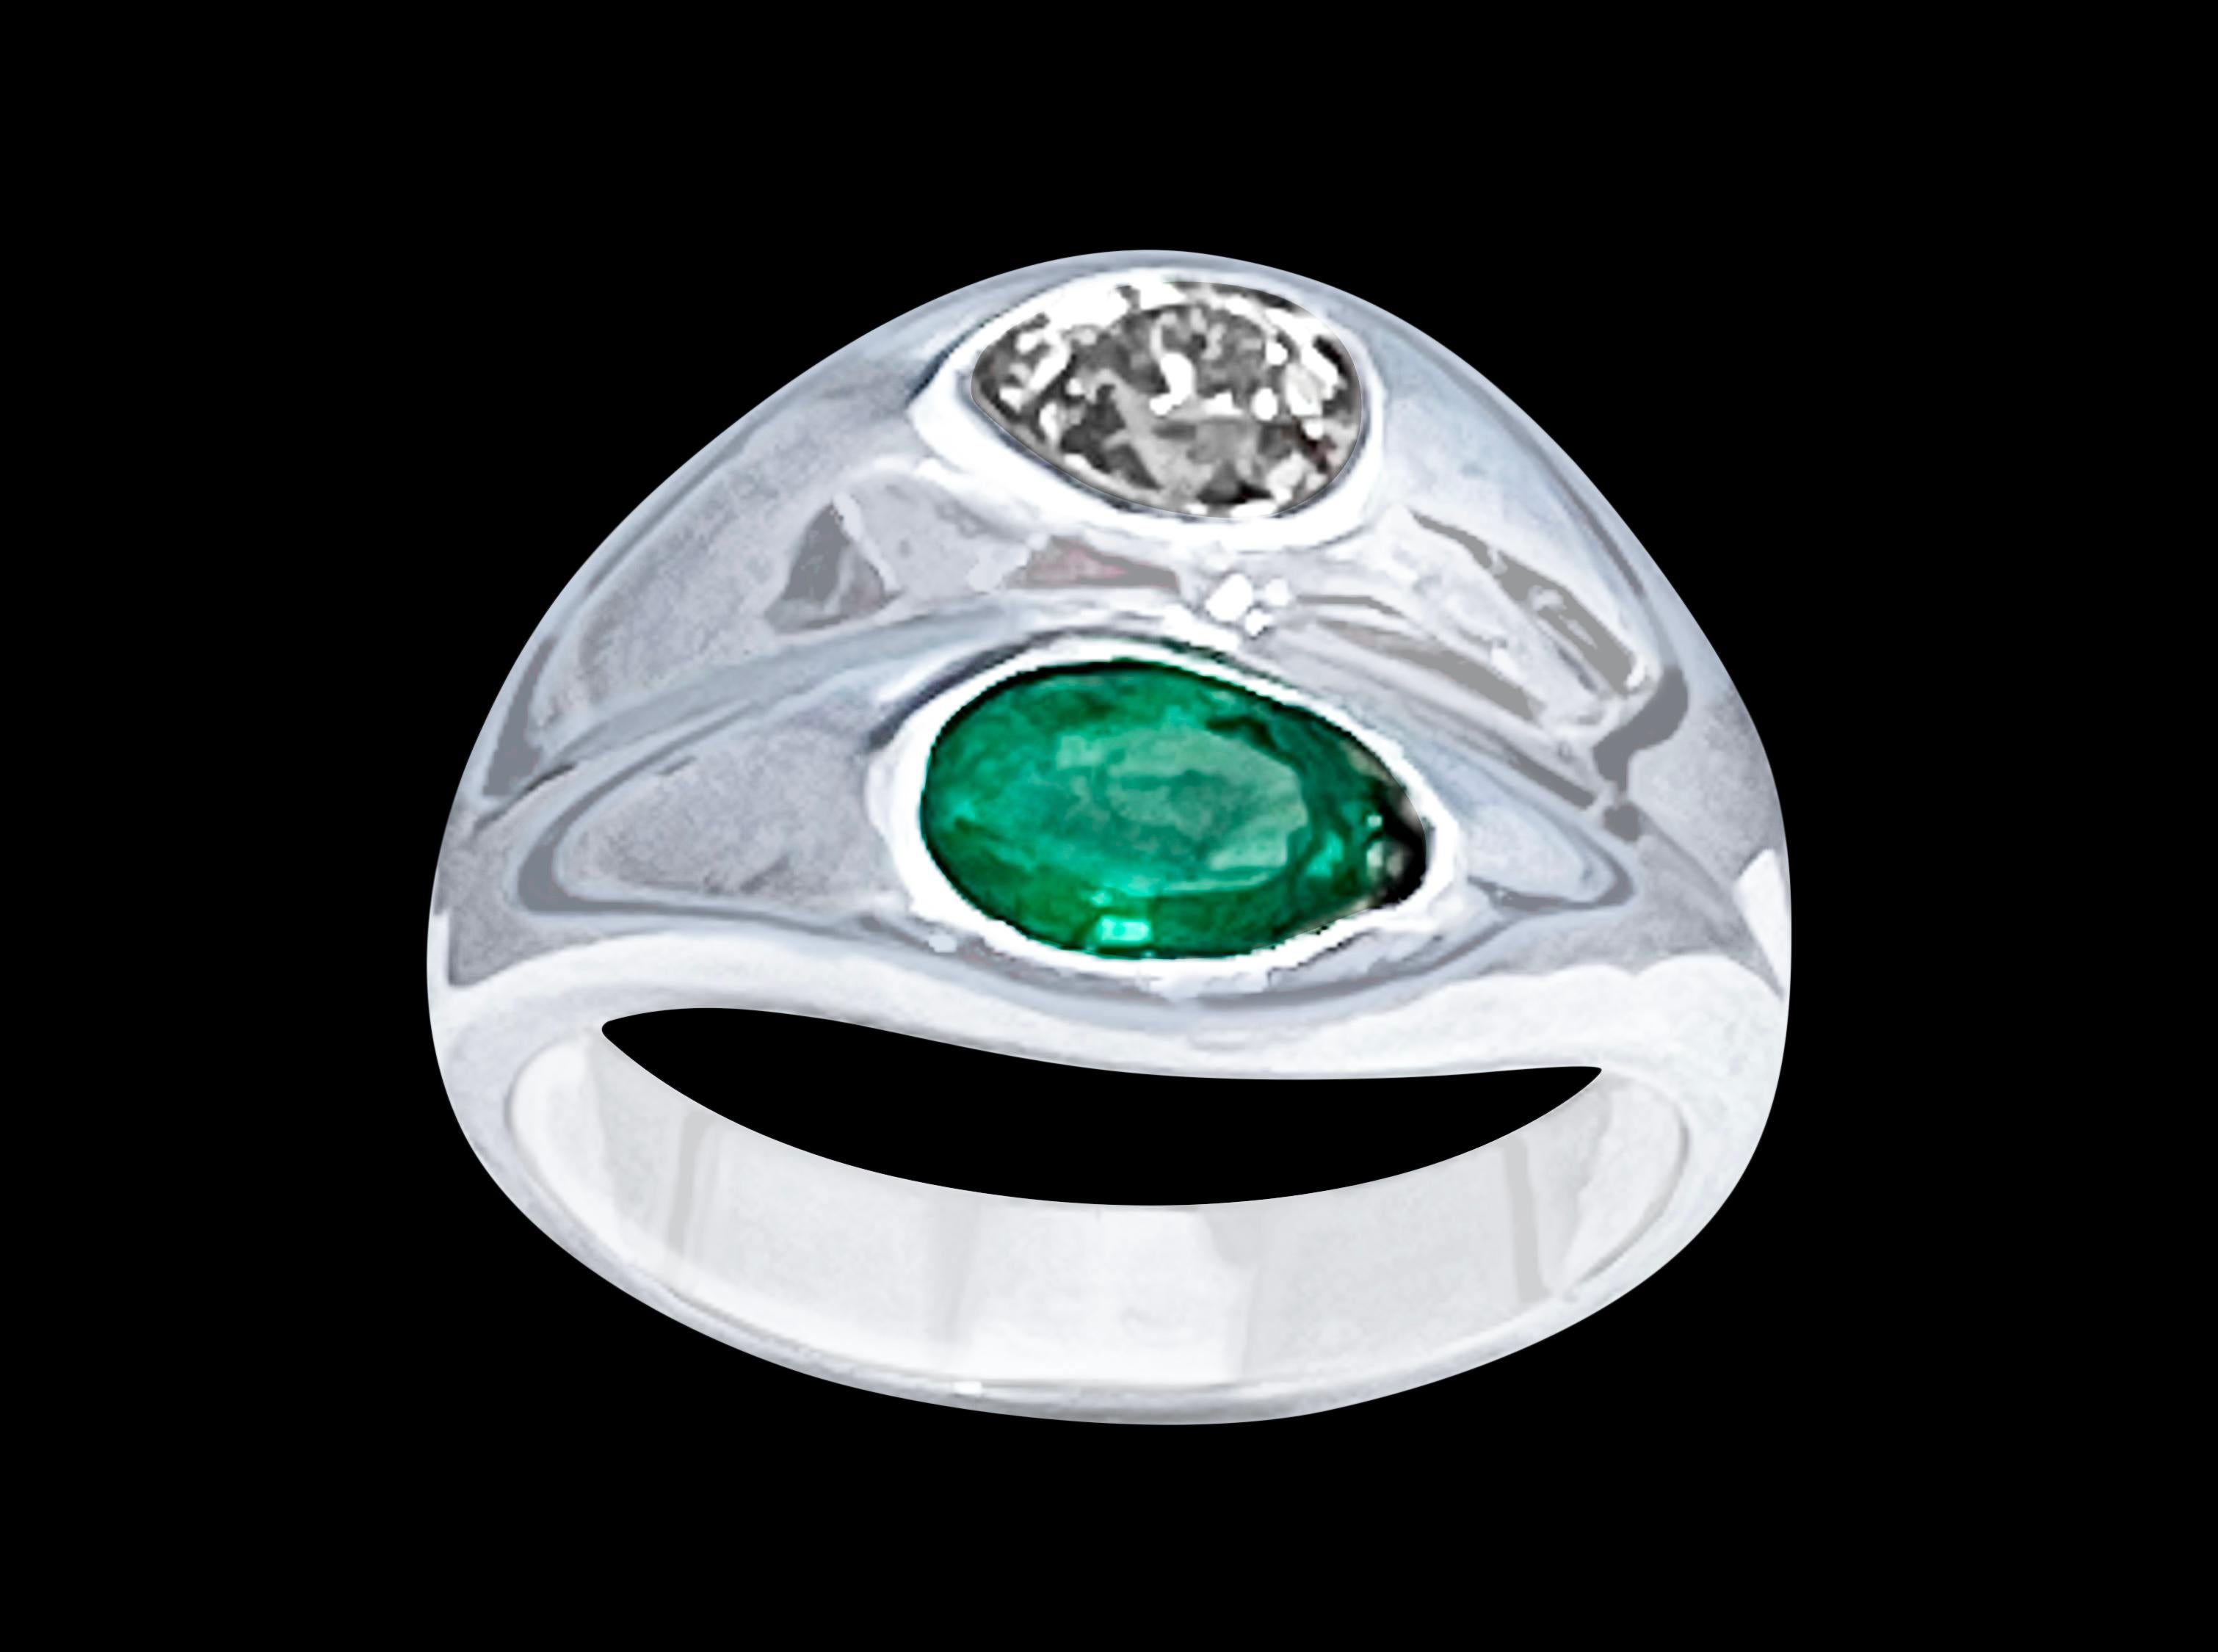 
Approximately 1 Carat Pear Cut  Emerald &  0.80 ct Diamond Ring 14 Karat  White Gold Size 8
2 Pear shape  Emerald Ring
 Emeralds are very precious , Very Difficult to find now a days  and getting more more difficult to find for a good price
A